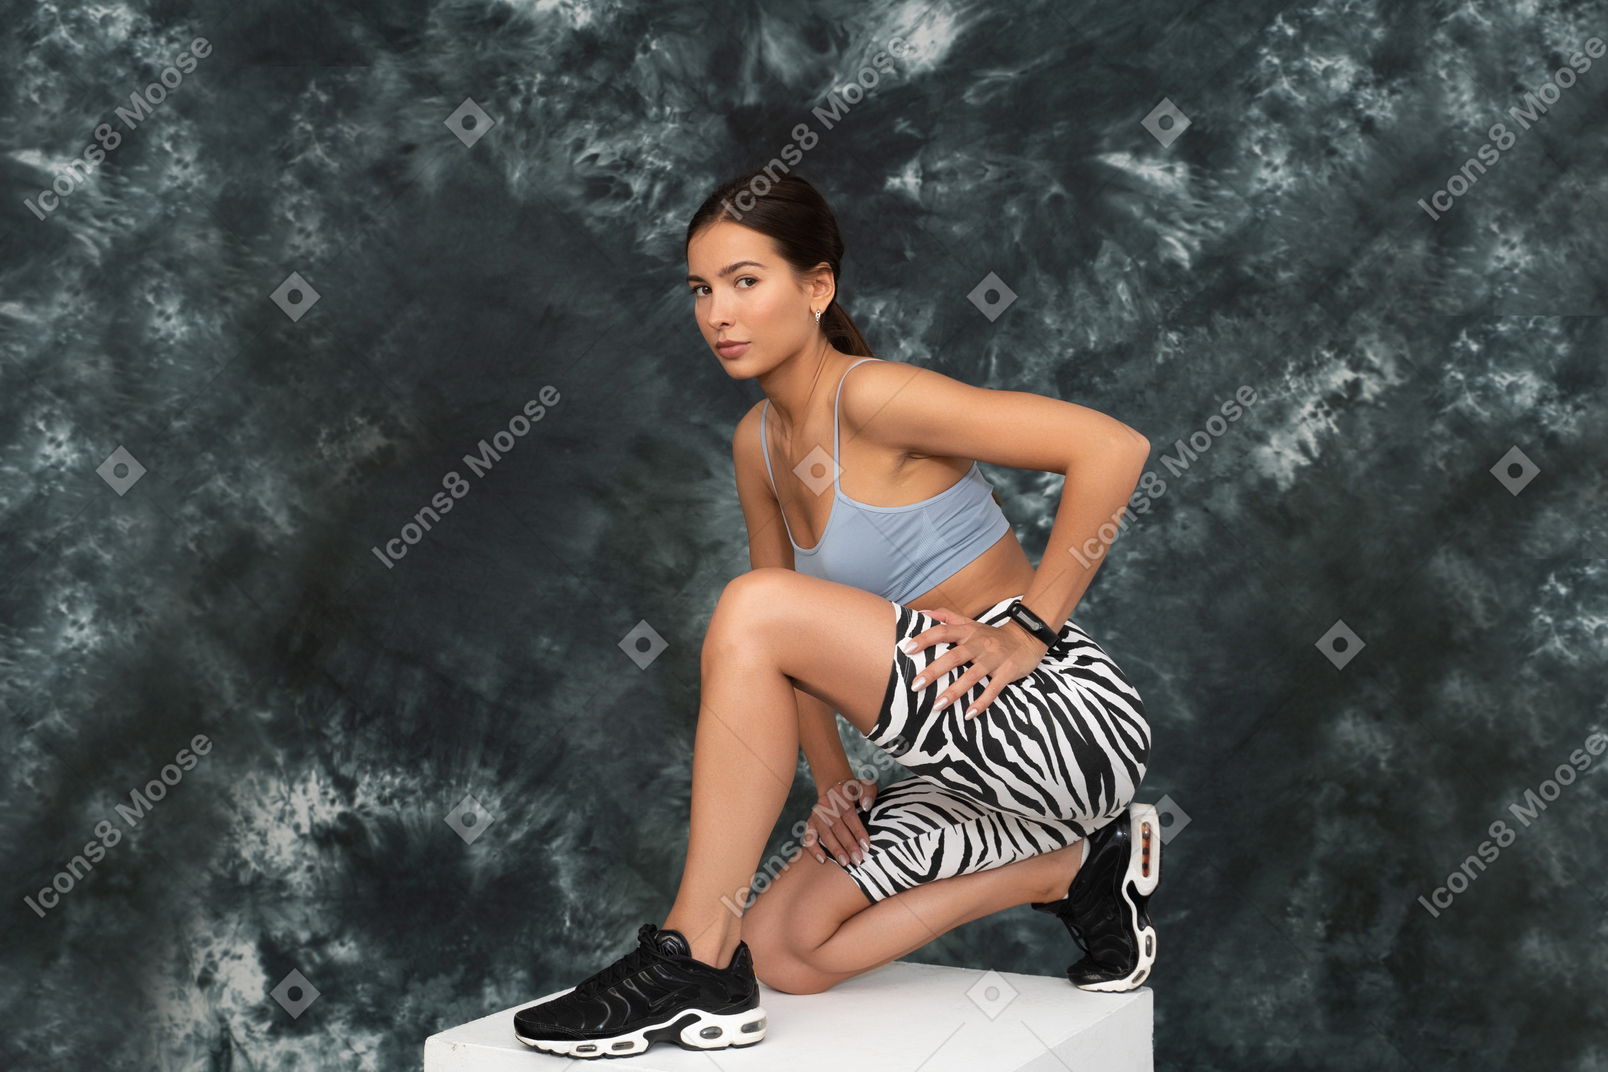 Full-length a female athlete squatting confidently leaning hip